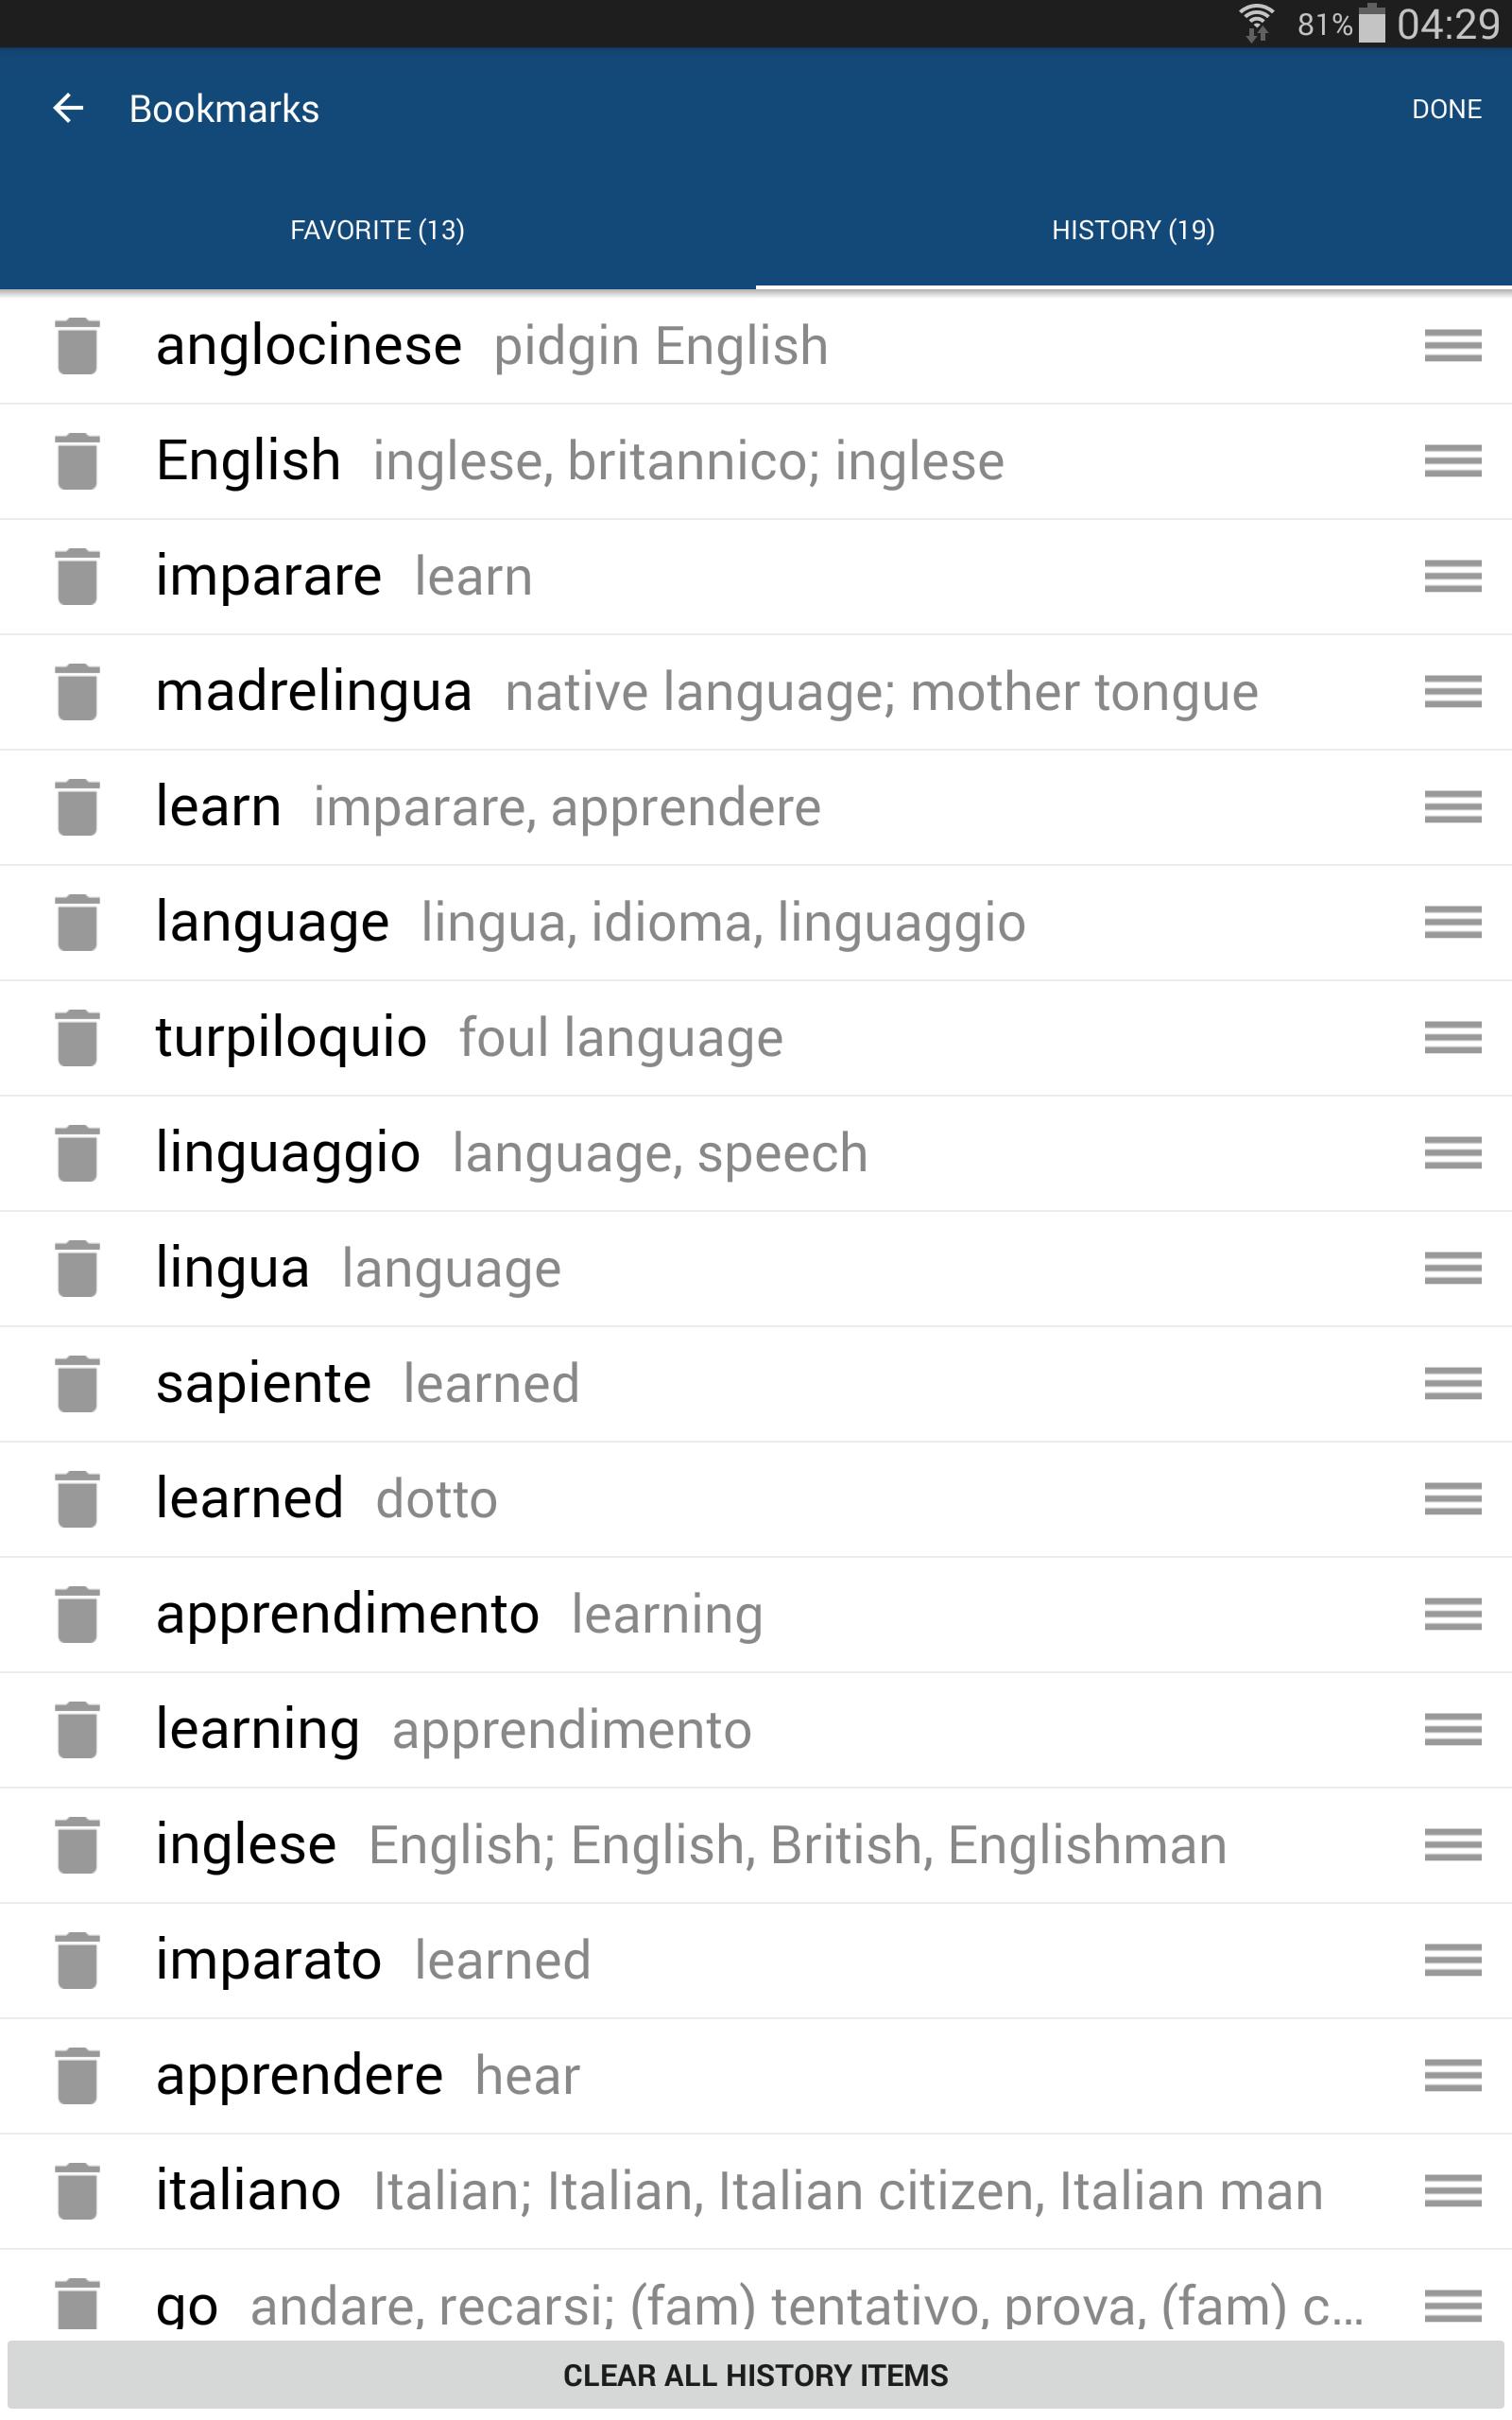 Italian English Dictionary & Translator Free for Android - APK Download english to italian translation dictionary online